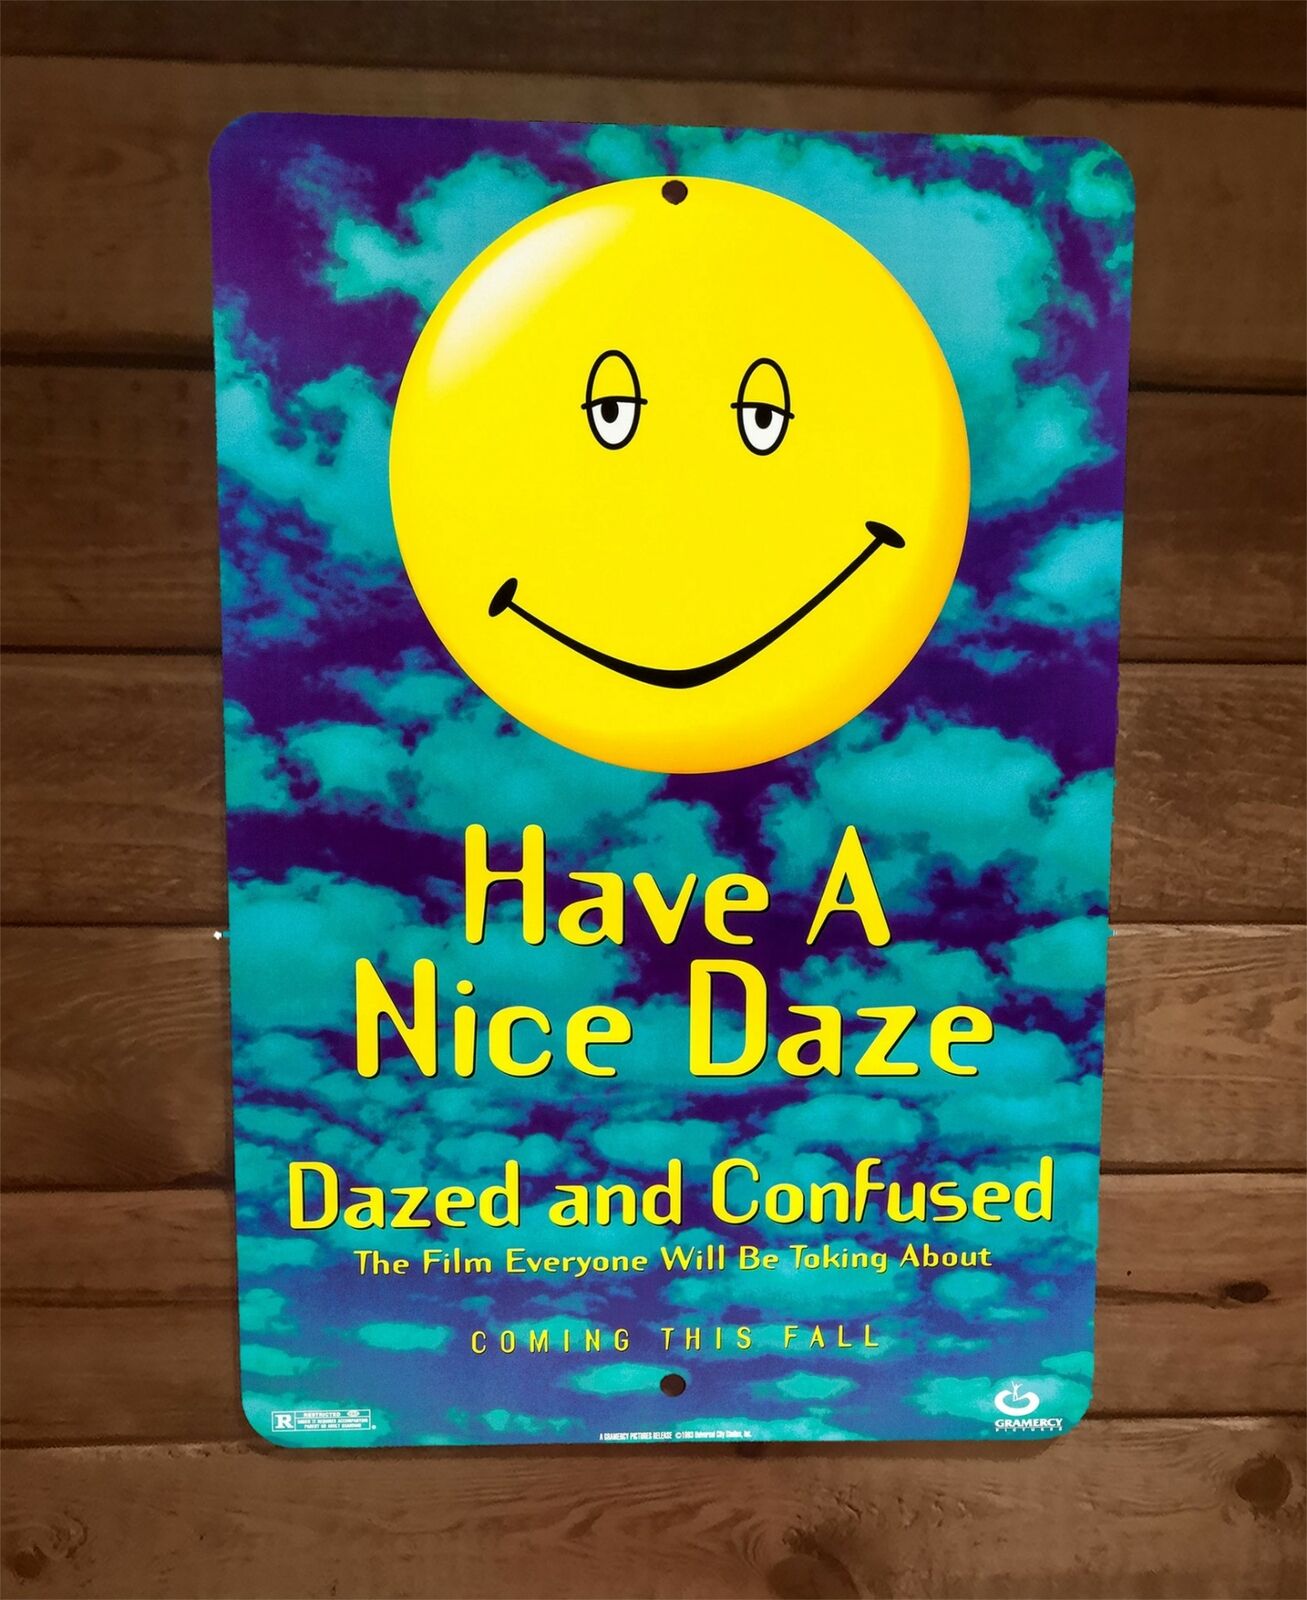 Have a Nice Daze Dazed and Confused Movie Poster 8x12 Metal Wall Sign